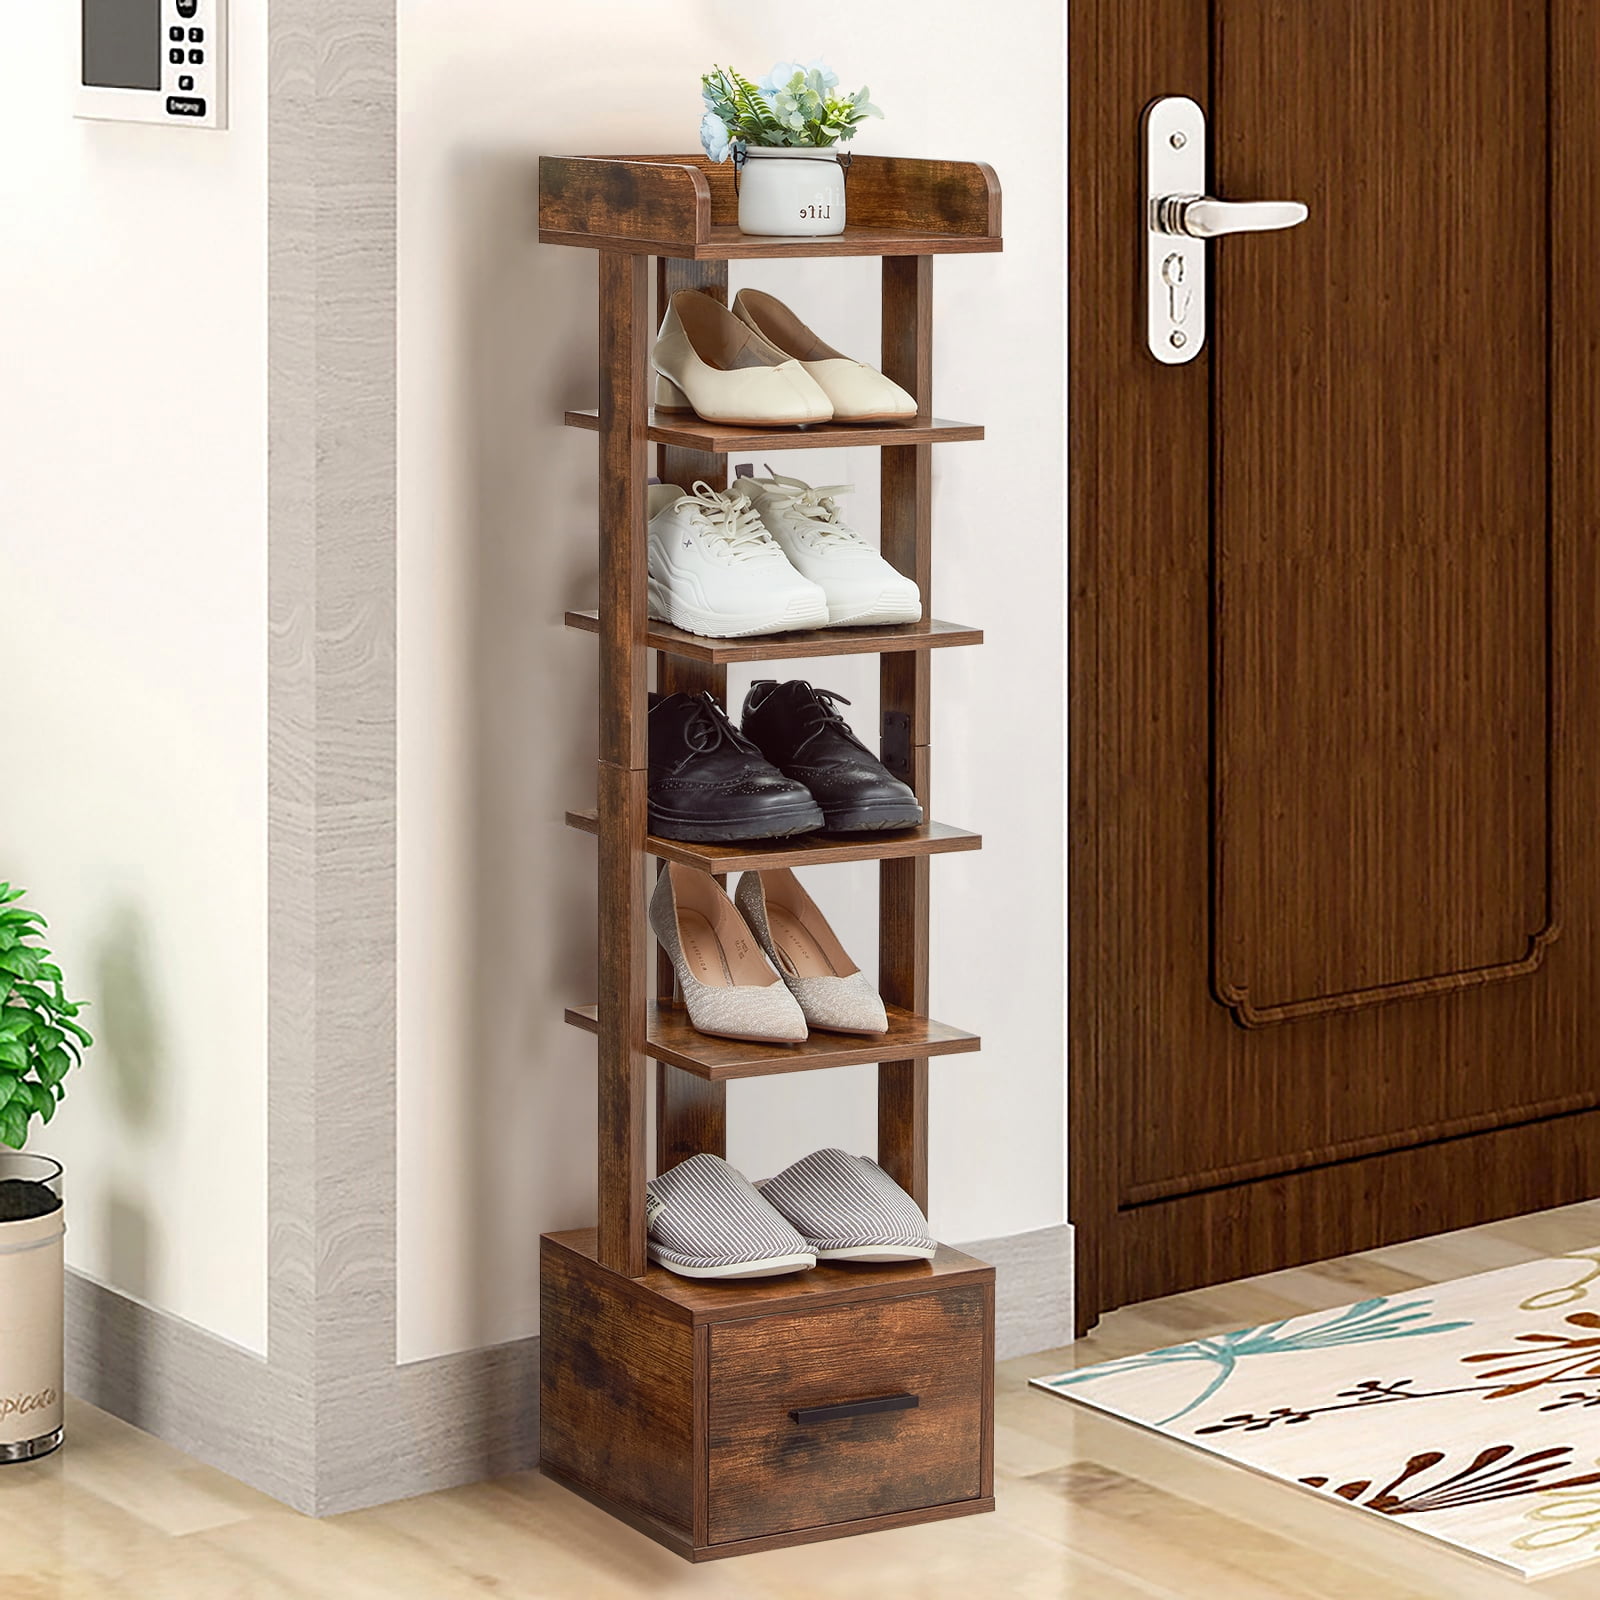  usikey Large Vertical Shoe Rack, 8 Tiers Wooden Shoes